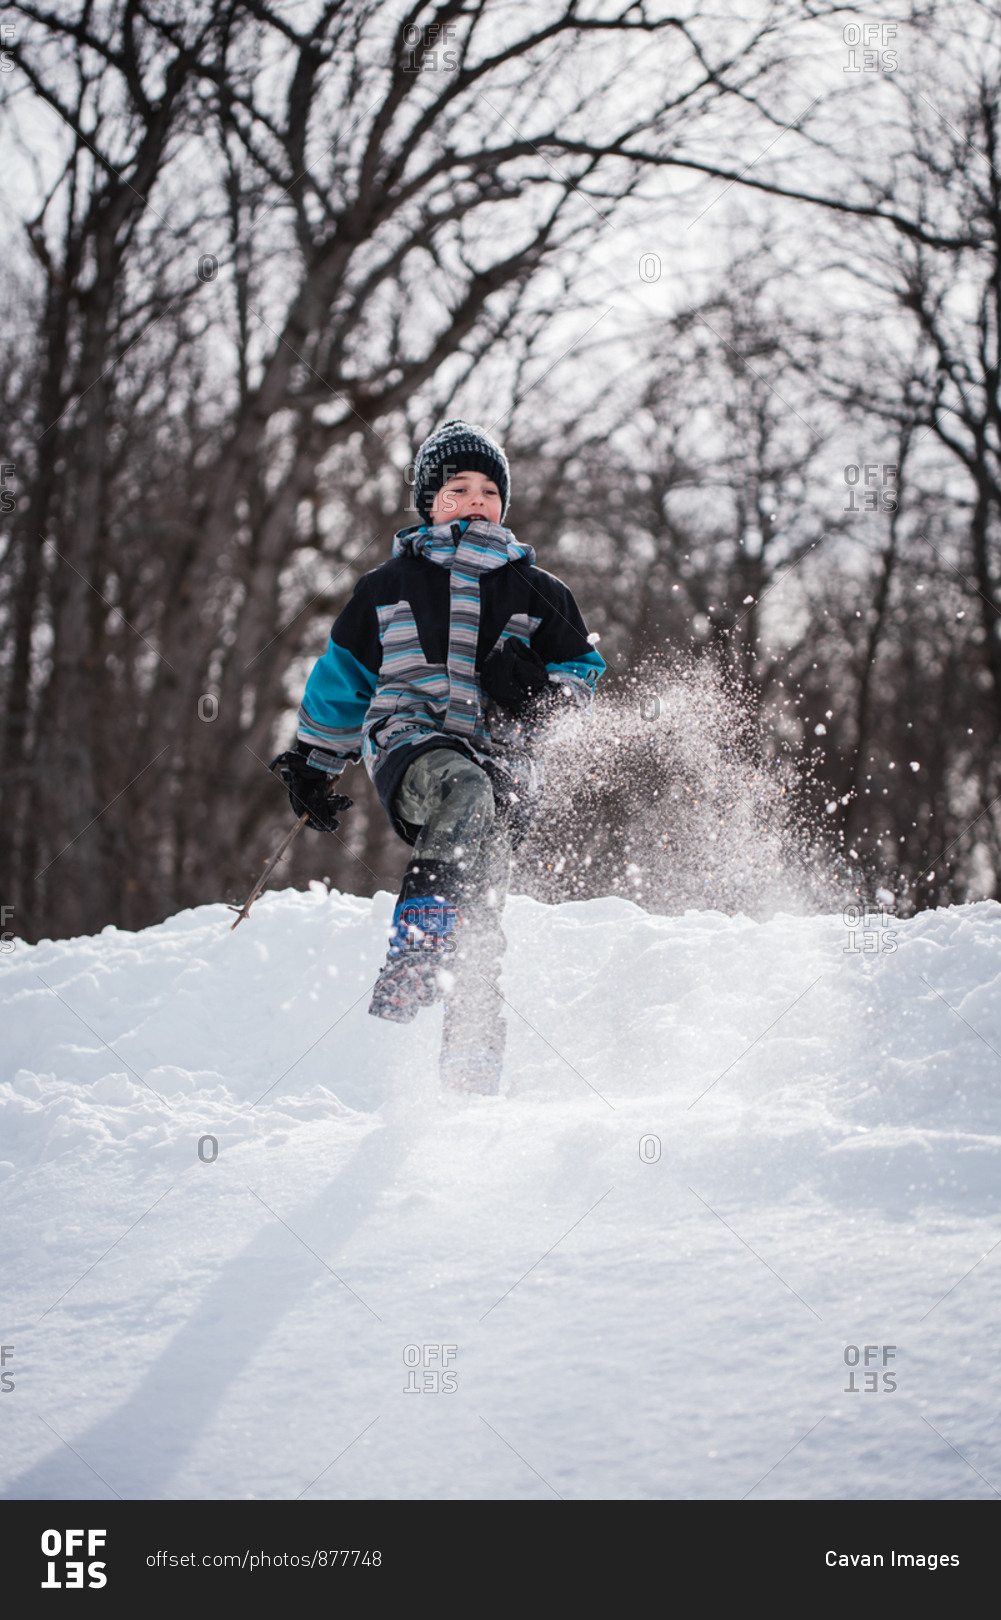 Young boy kicking snow in air on a winter day in wooded area.